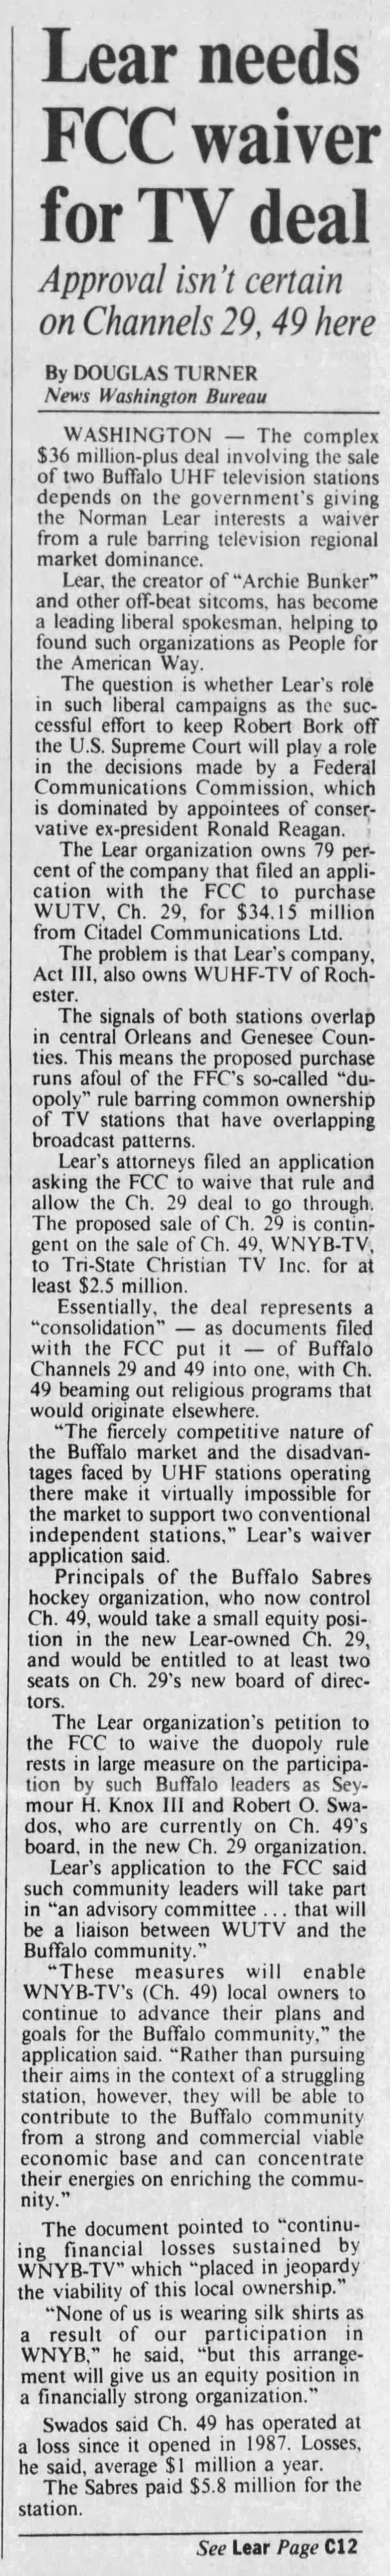 Lear needs FCC waiver for TV deal: Approval isn't certain on Channels 29, 49 here